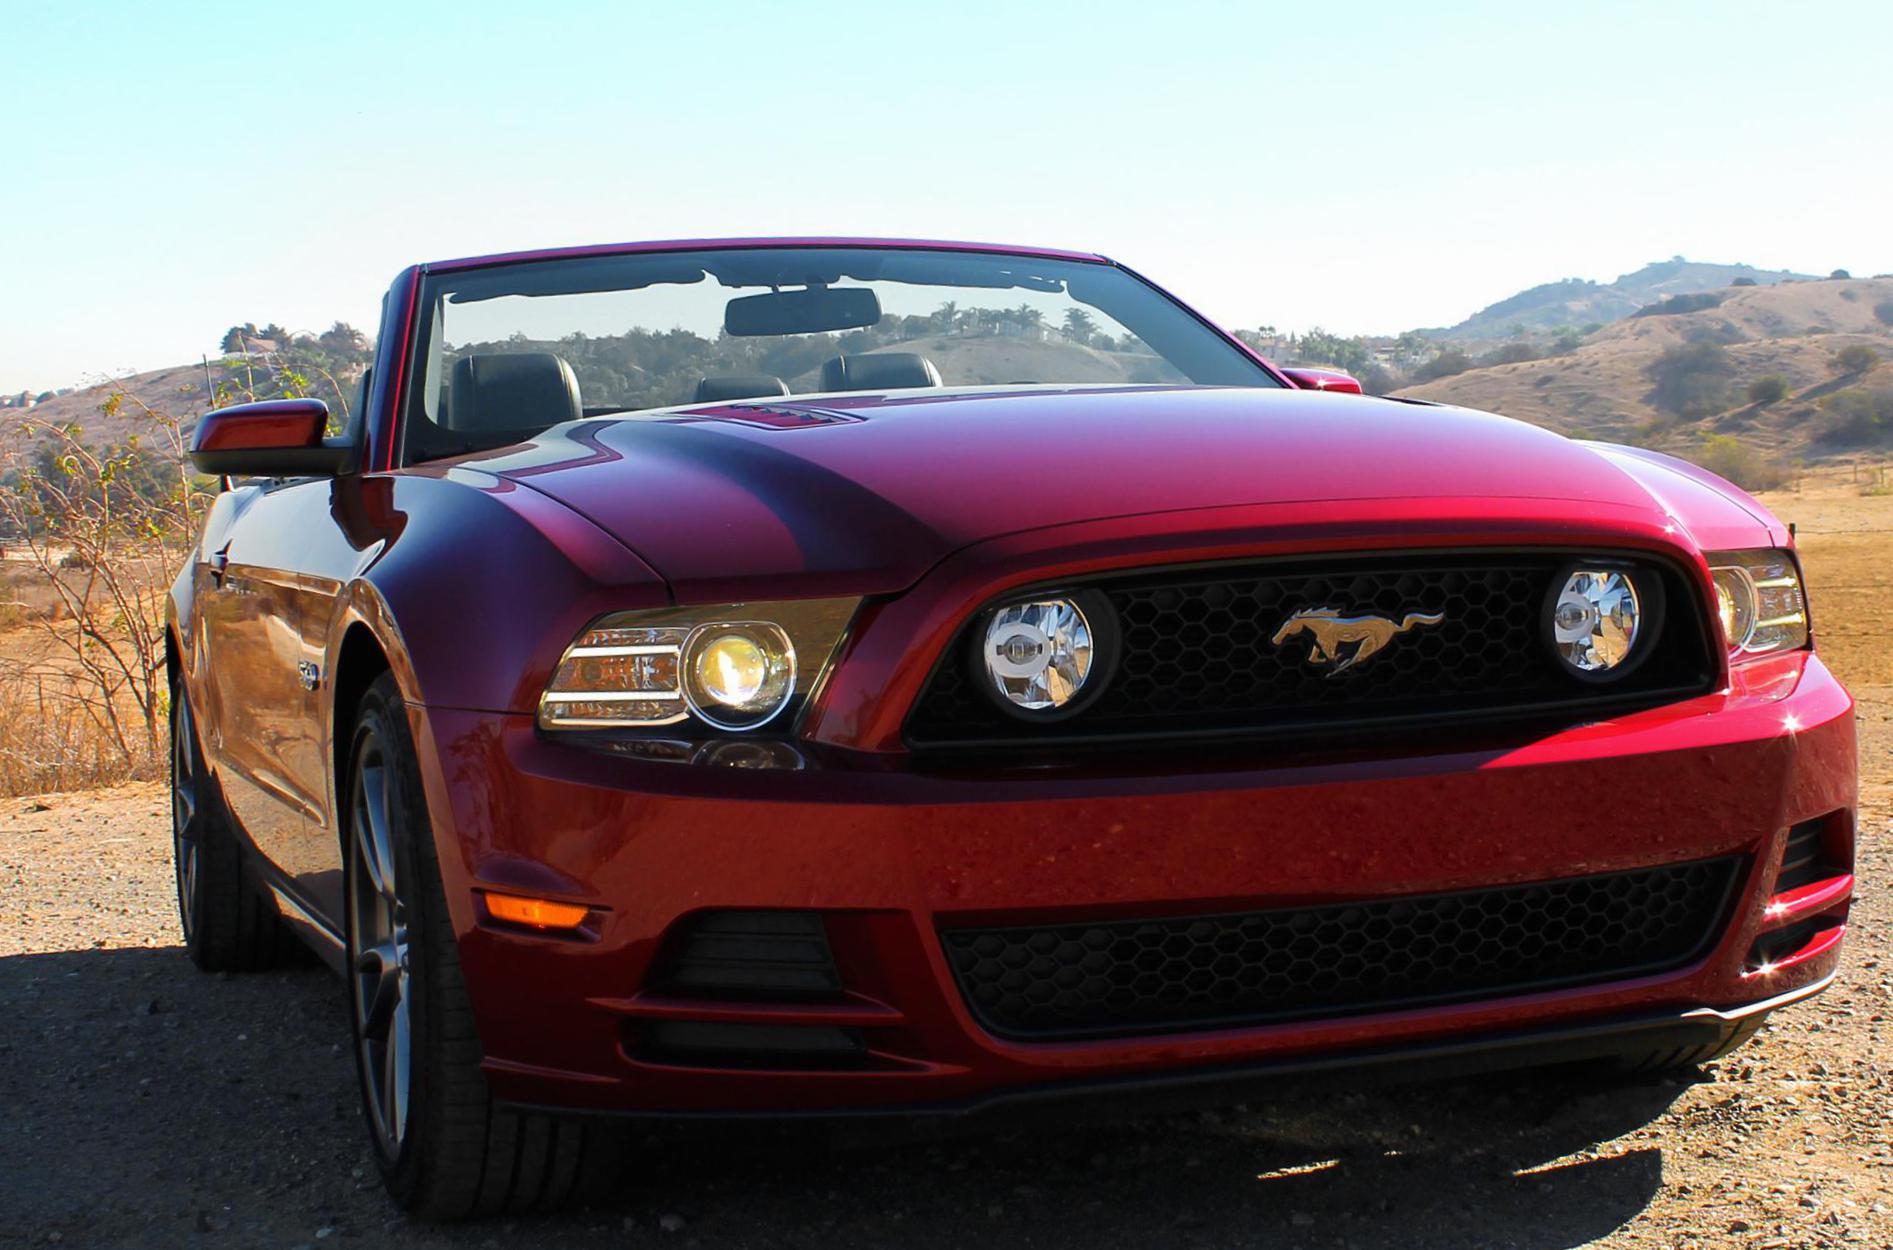 Ford Mustang Convertible configuration 2015